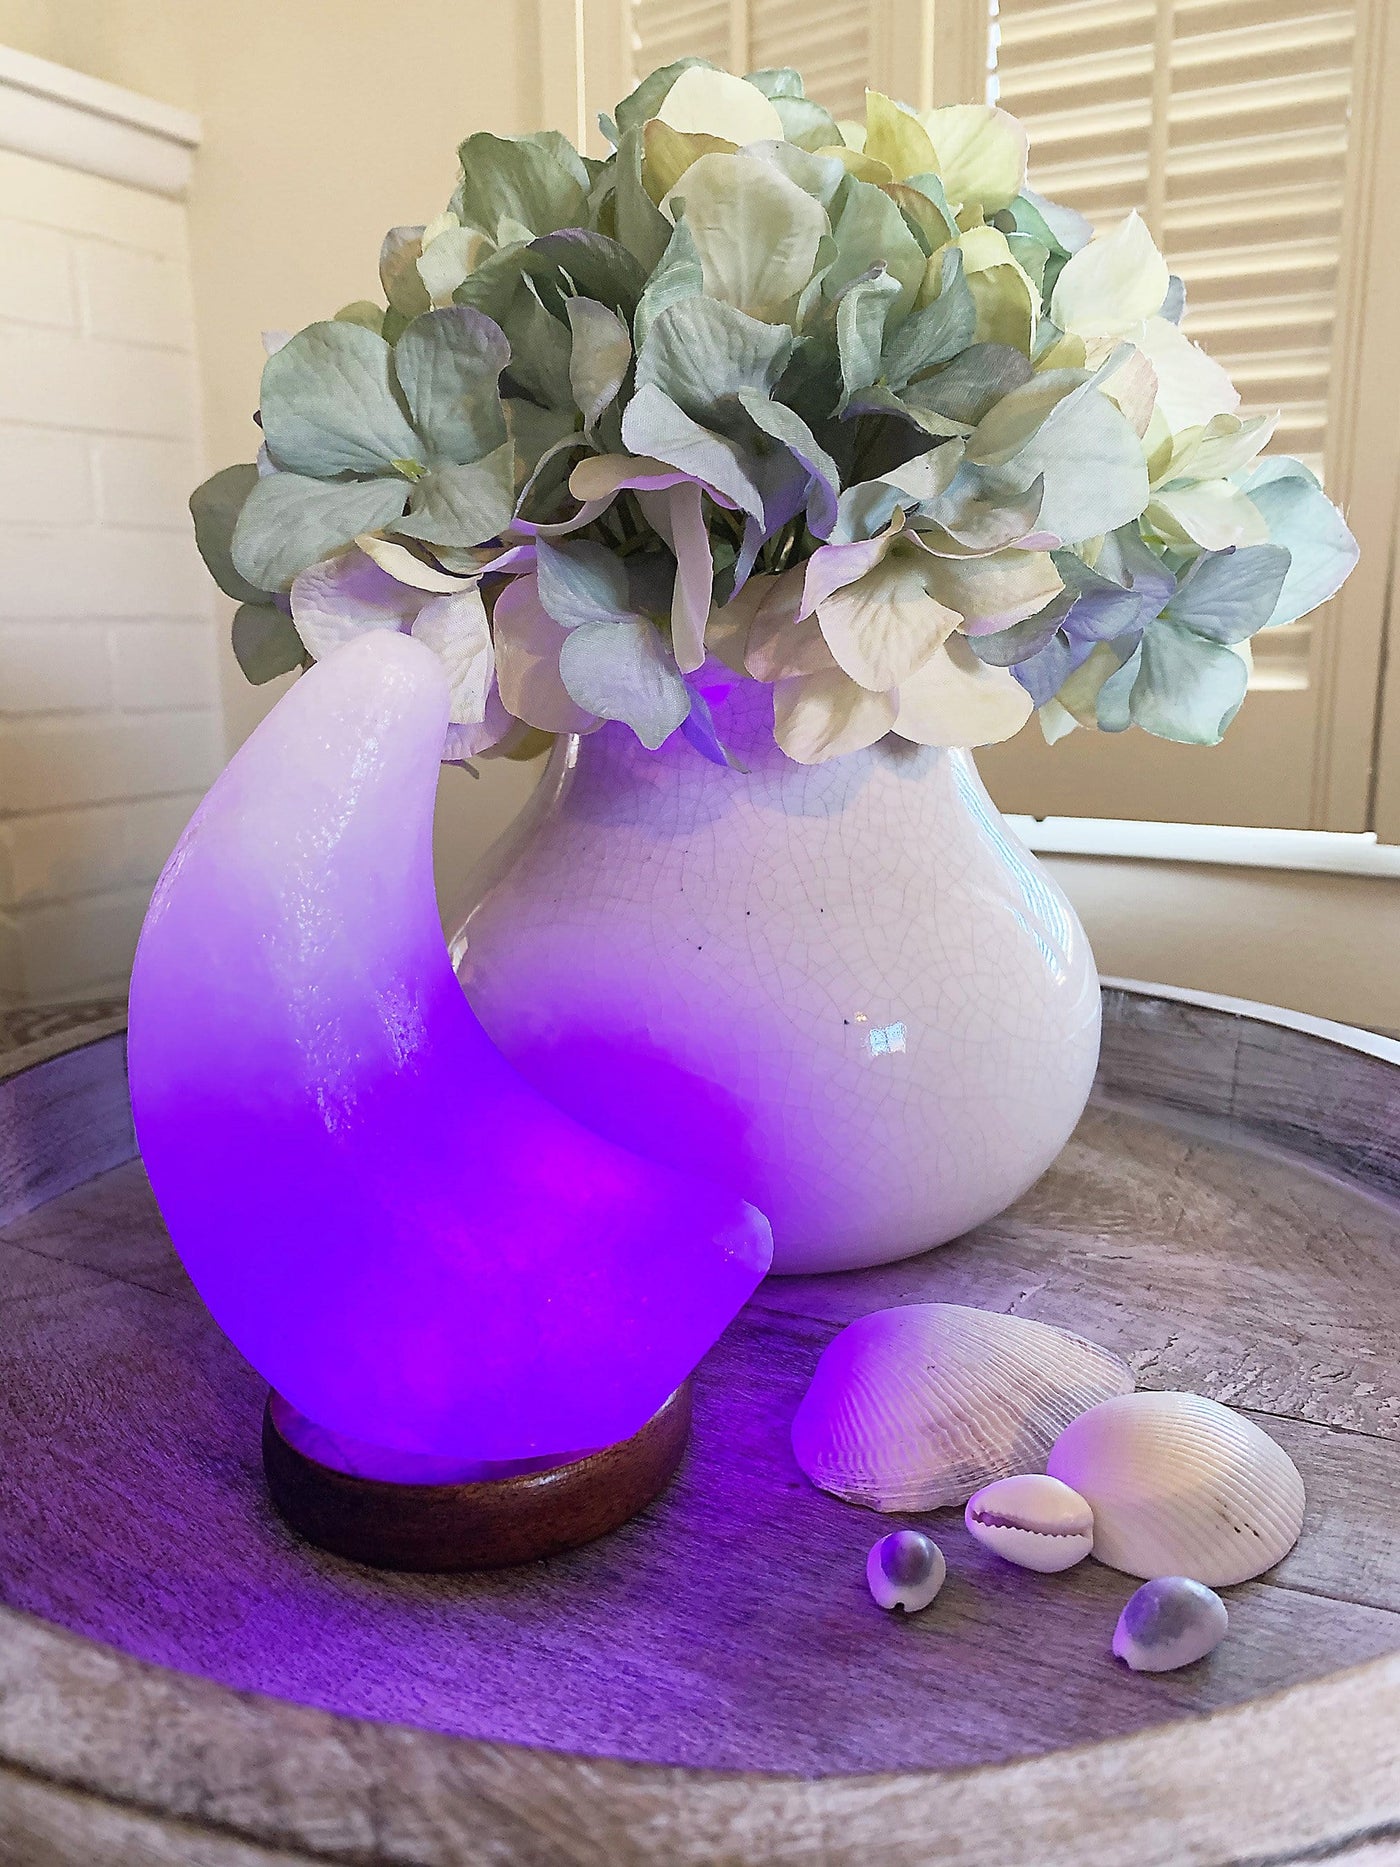 Moon shaped Himalayan Salt Lamp showing the changing color light, here in purple